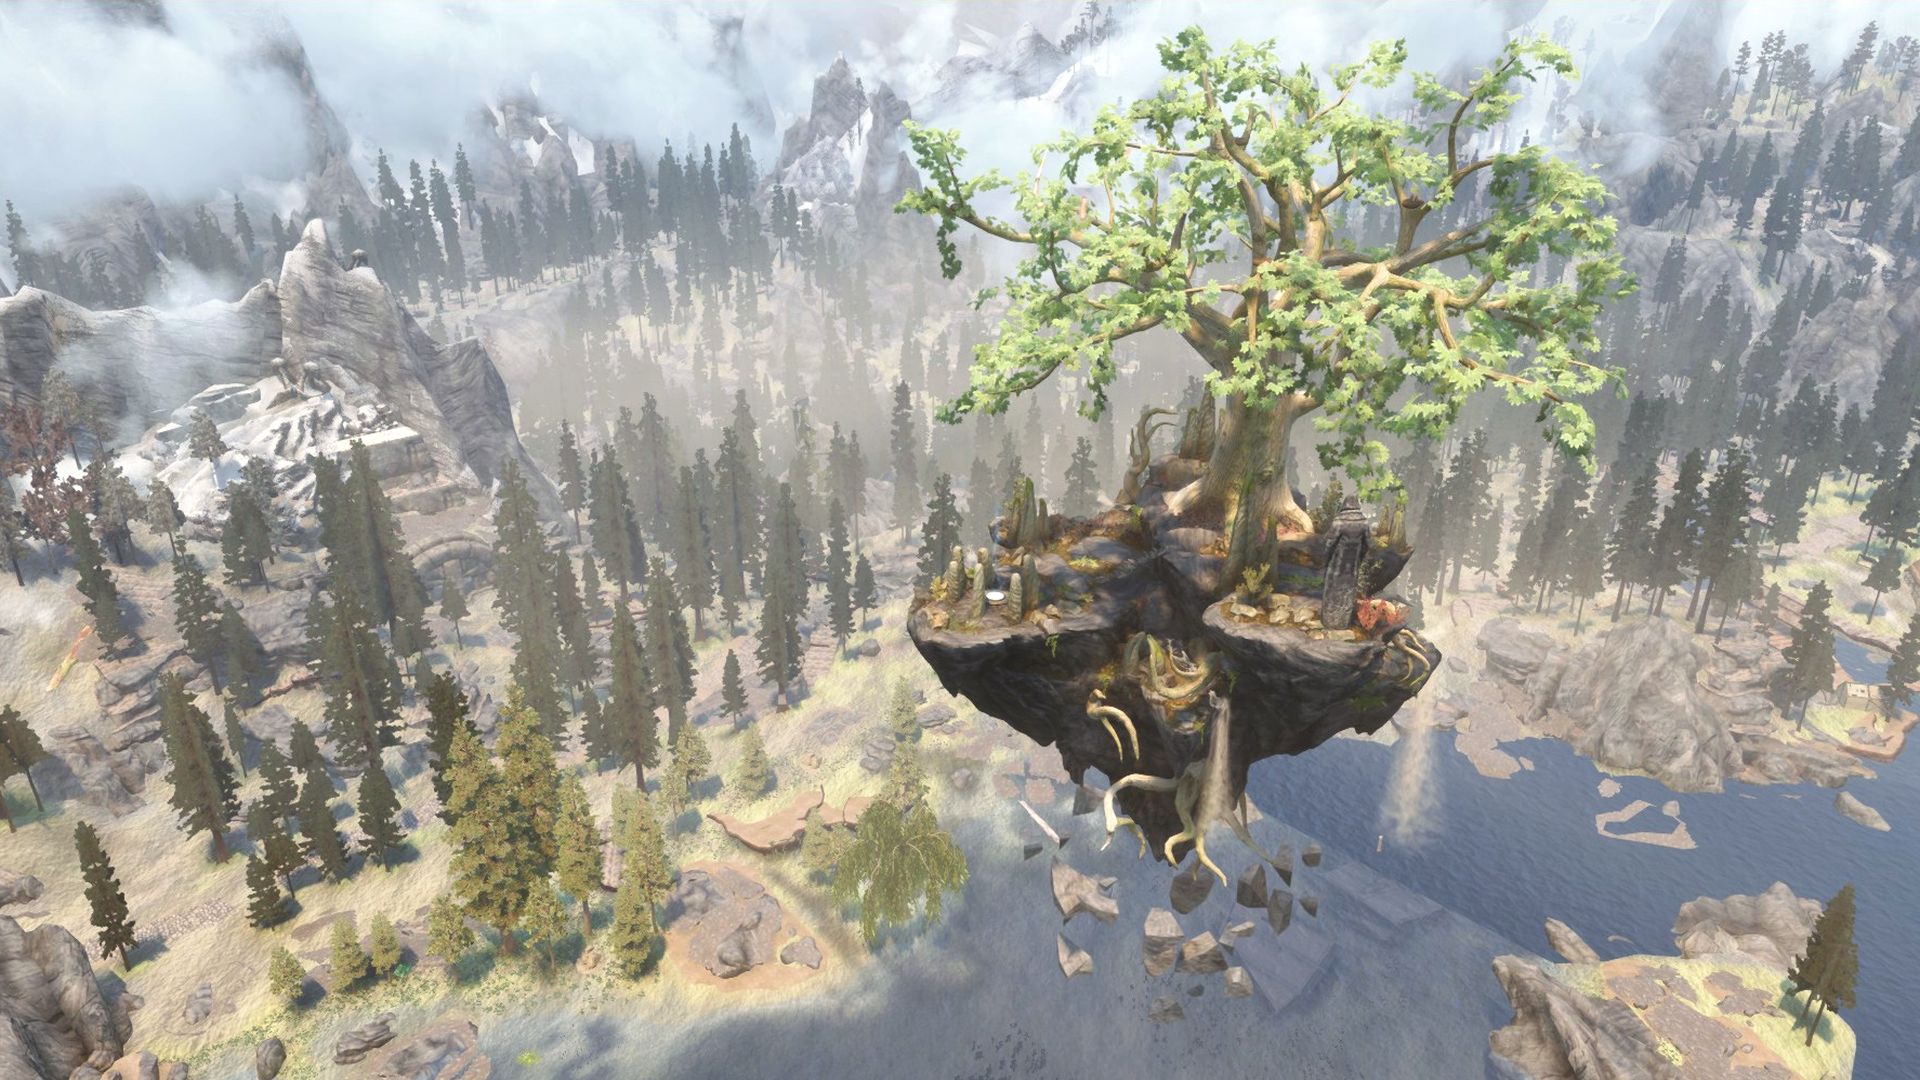 🌳Wise Mystical Tree - Skyrim Song🌳 